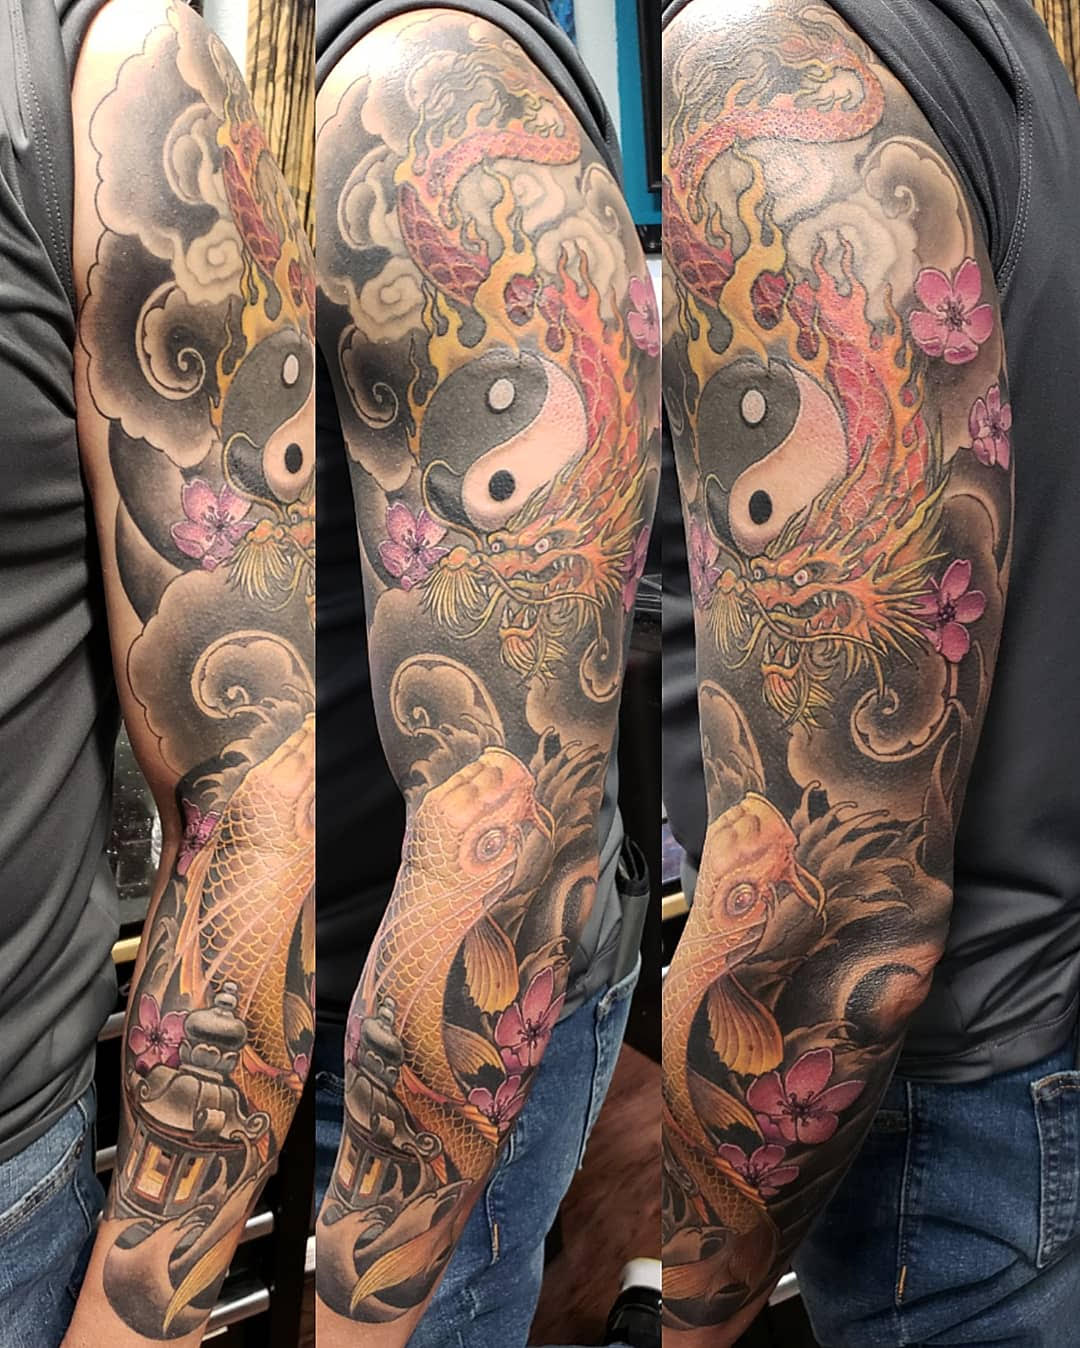 Riley Hogan on Instagram A really fun Asian inspired piece Ive been  working on Thanks for looking rileyhogantattoos bushidotattoo  sanctumequipment